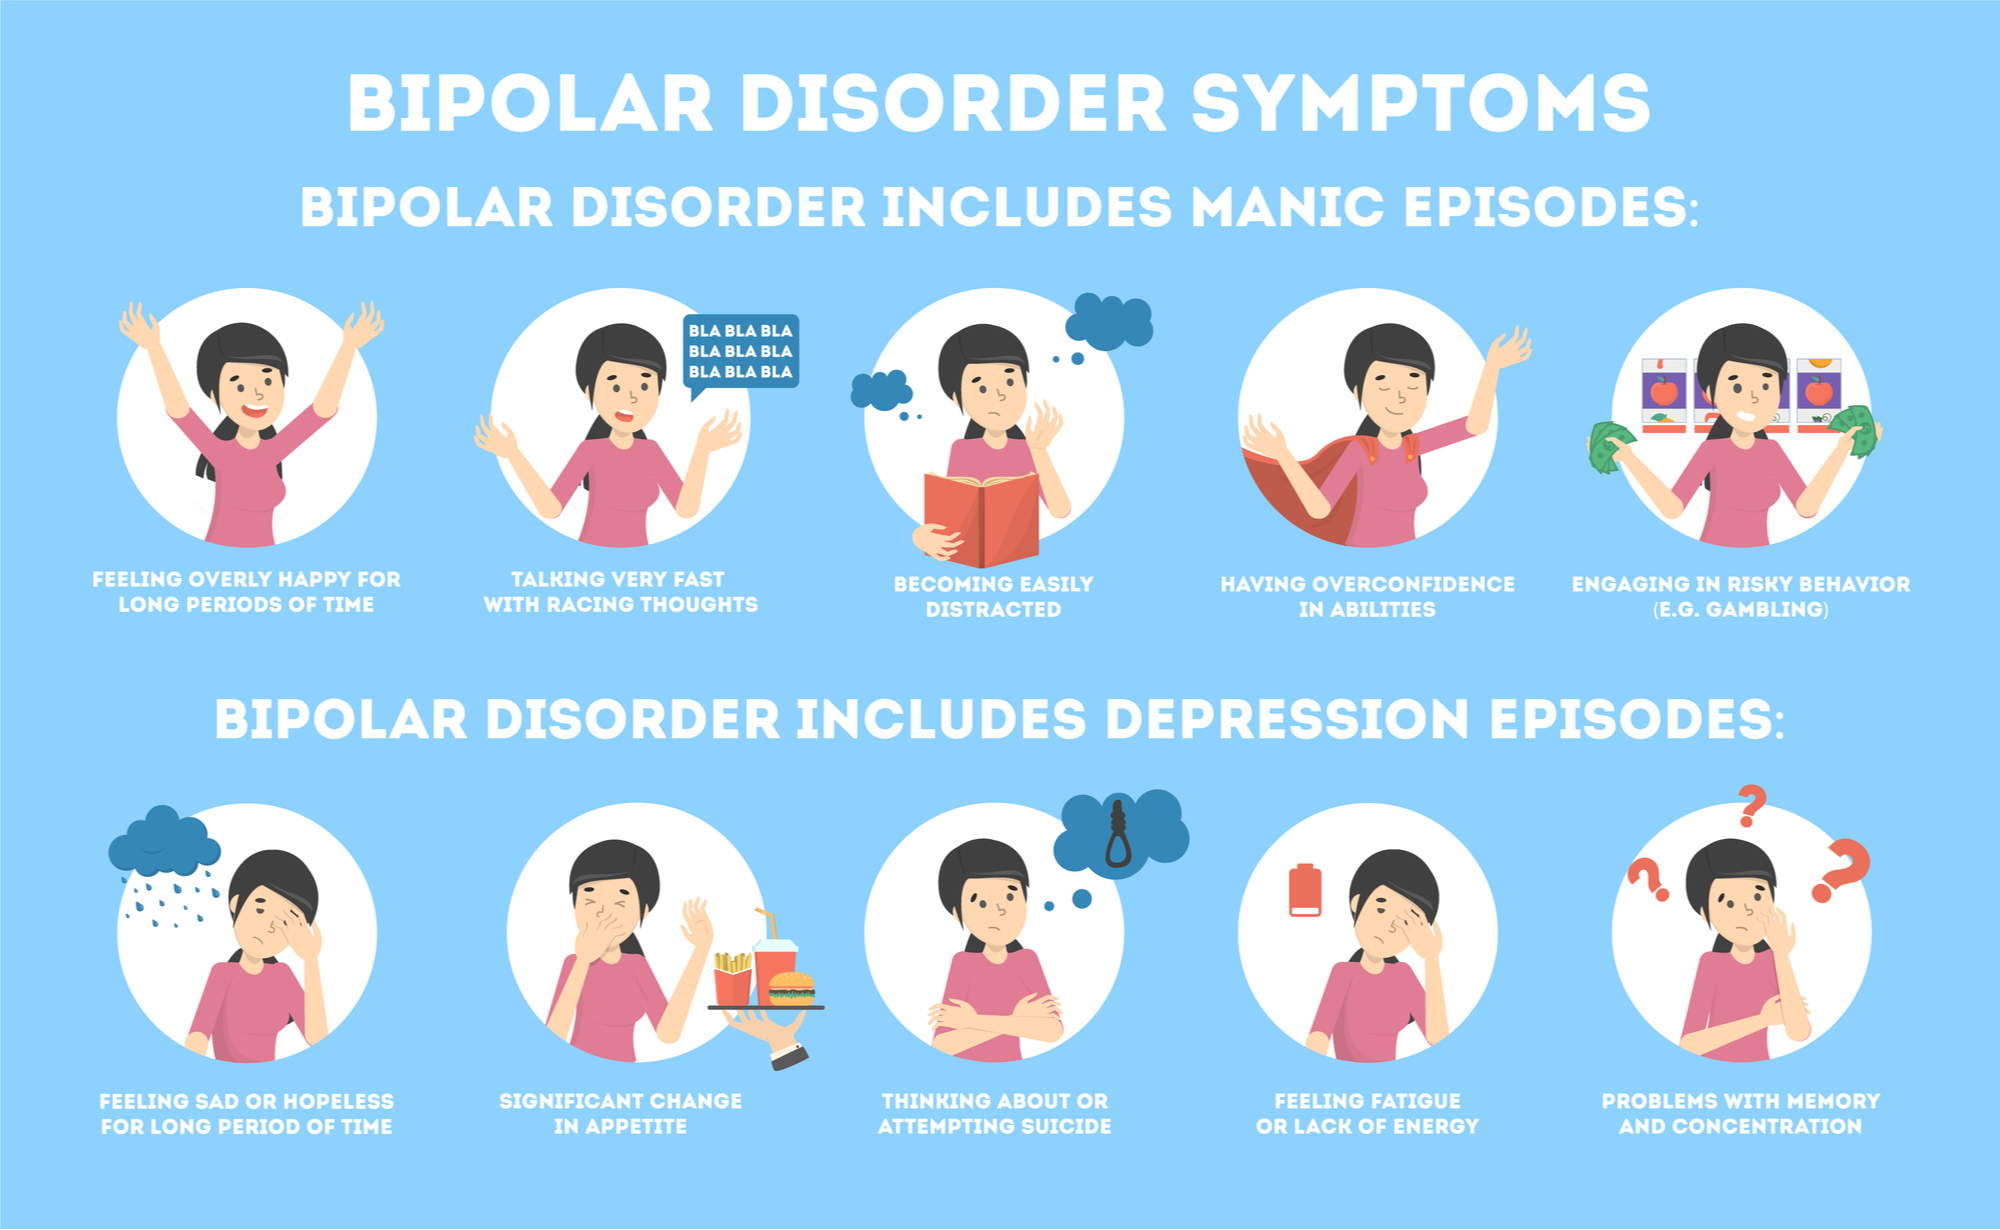 Bipolar Disorder Symptoms, Causes and Treatment Port St. Lucie